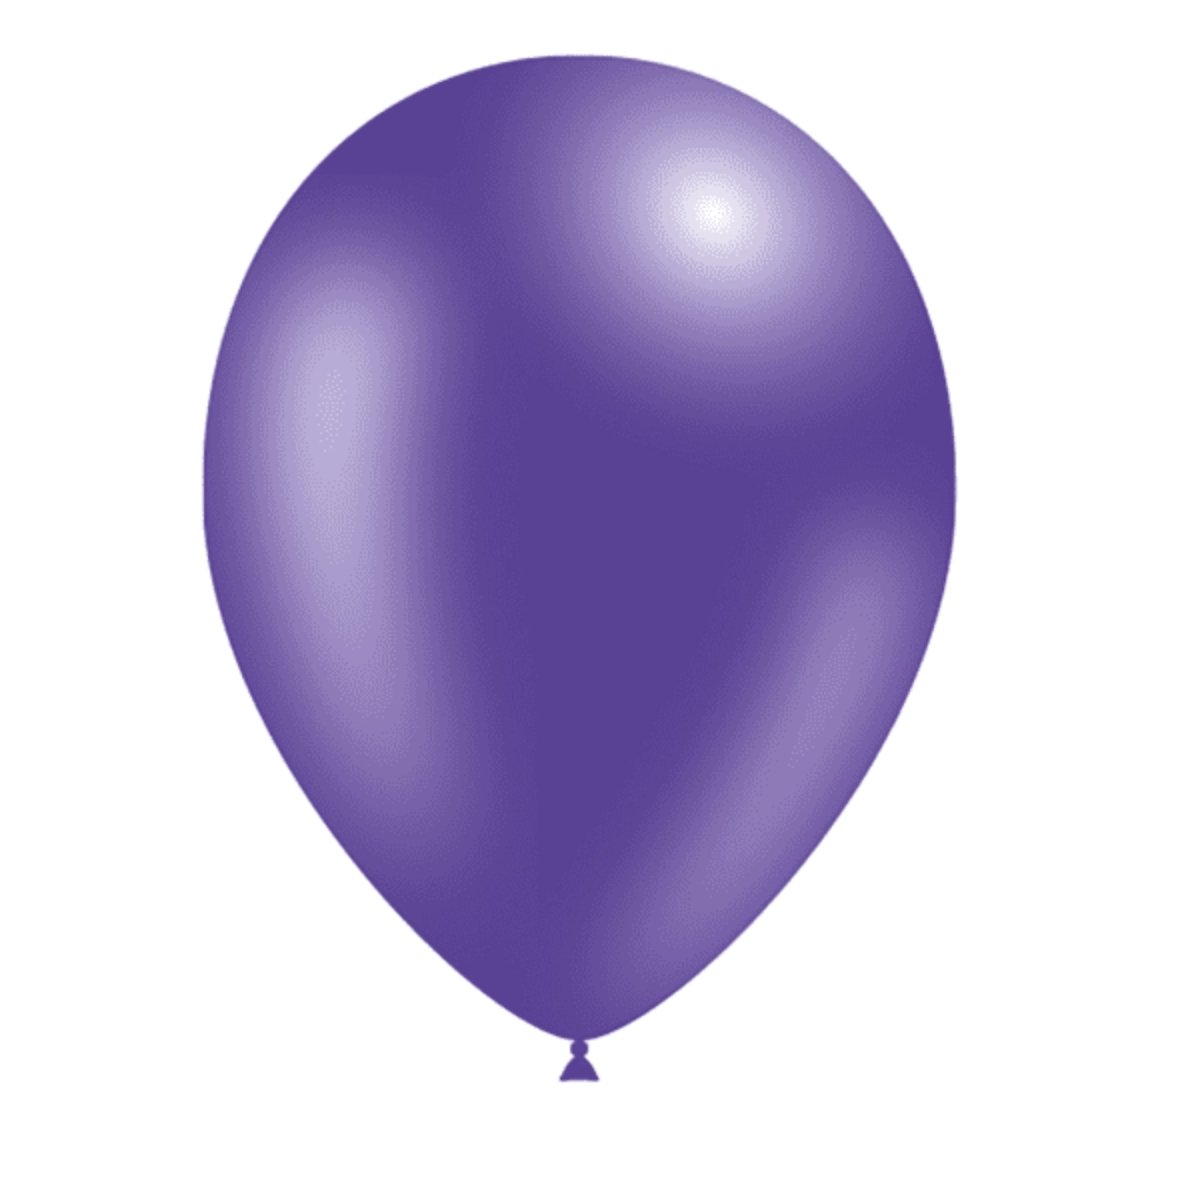 Metallic Lilac Balloons 28cm/11"- 10 Pack - Kids Party Craft